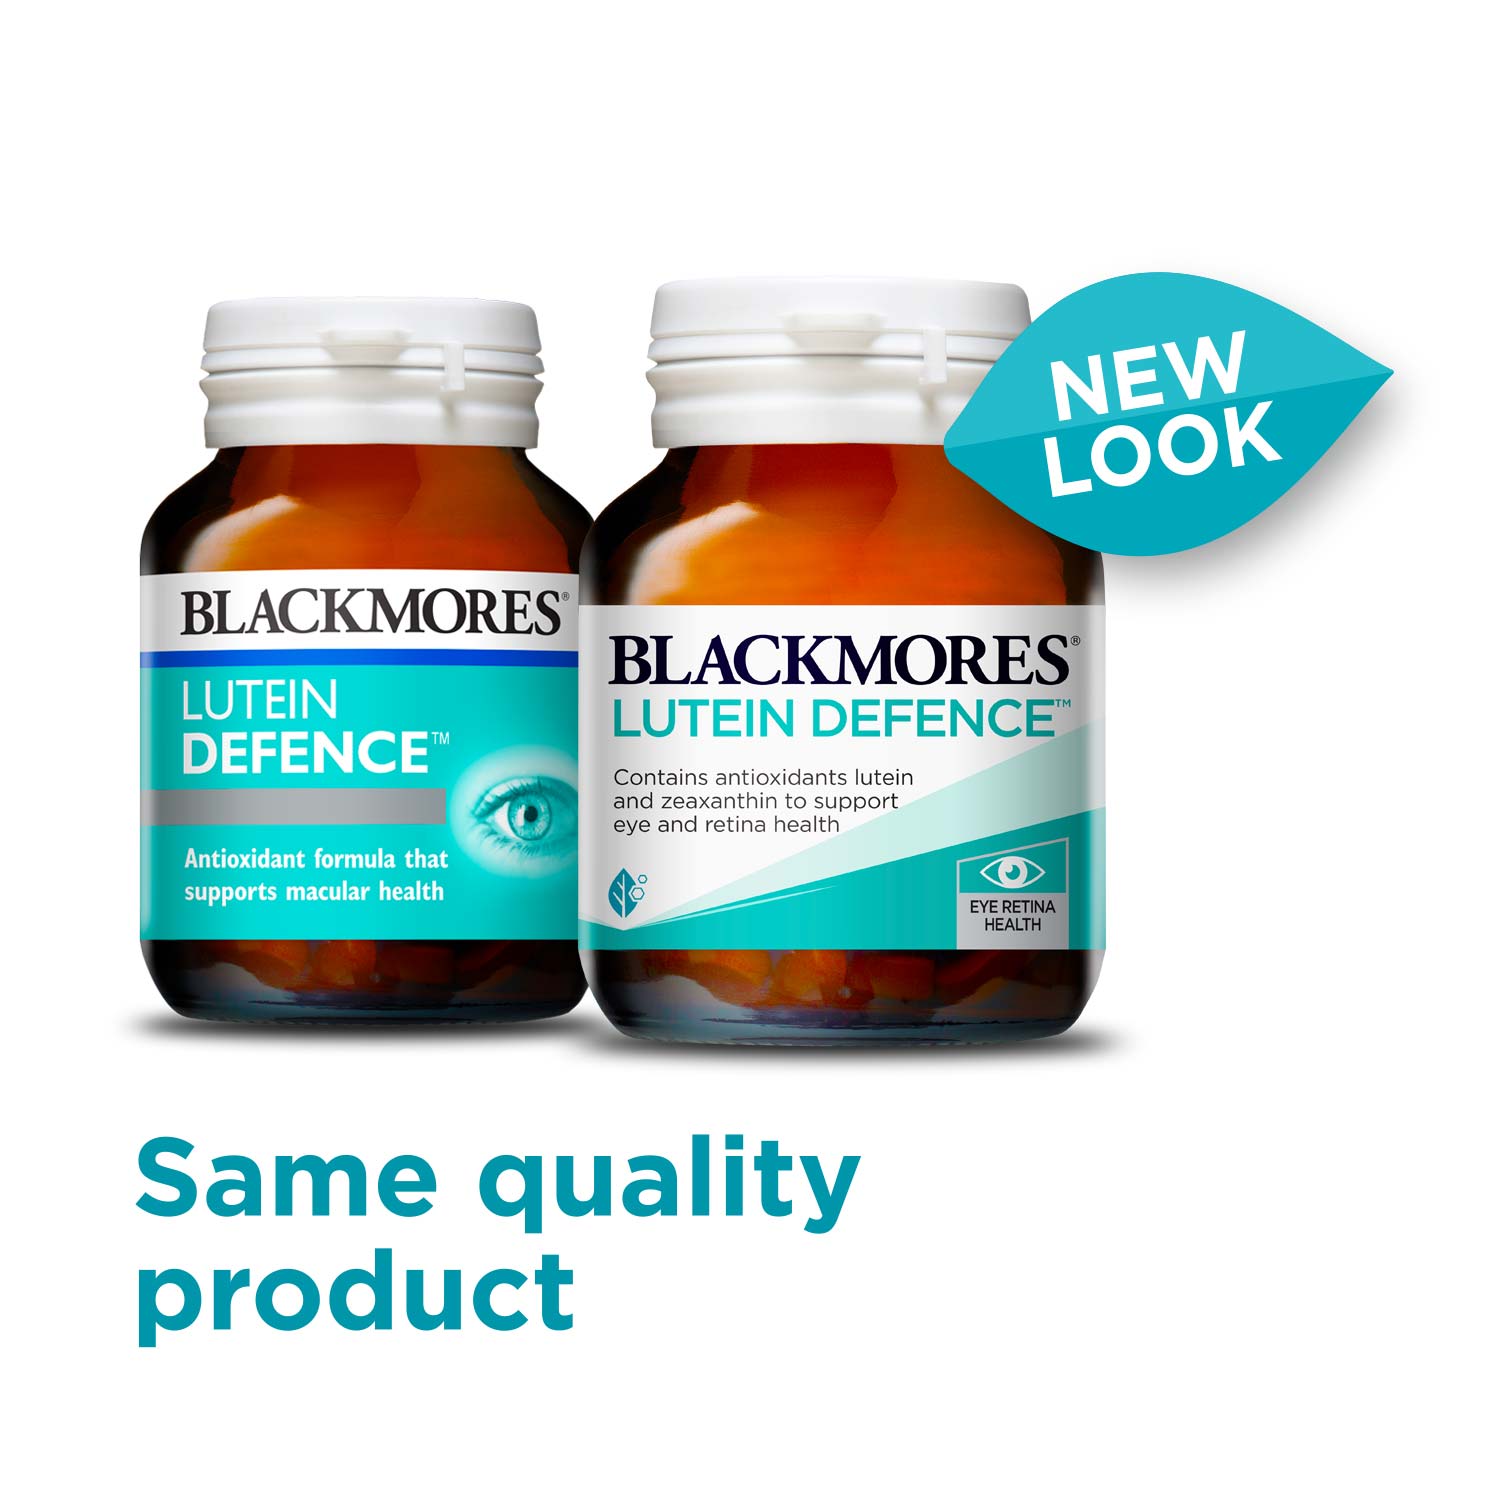 Blackmores Lutein Defence new look label